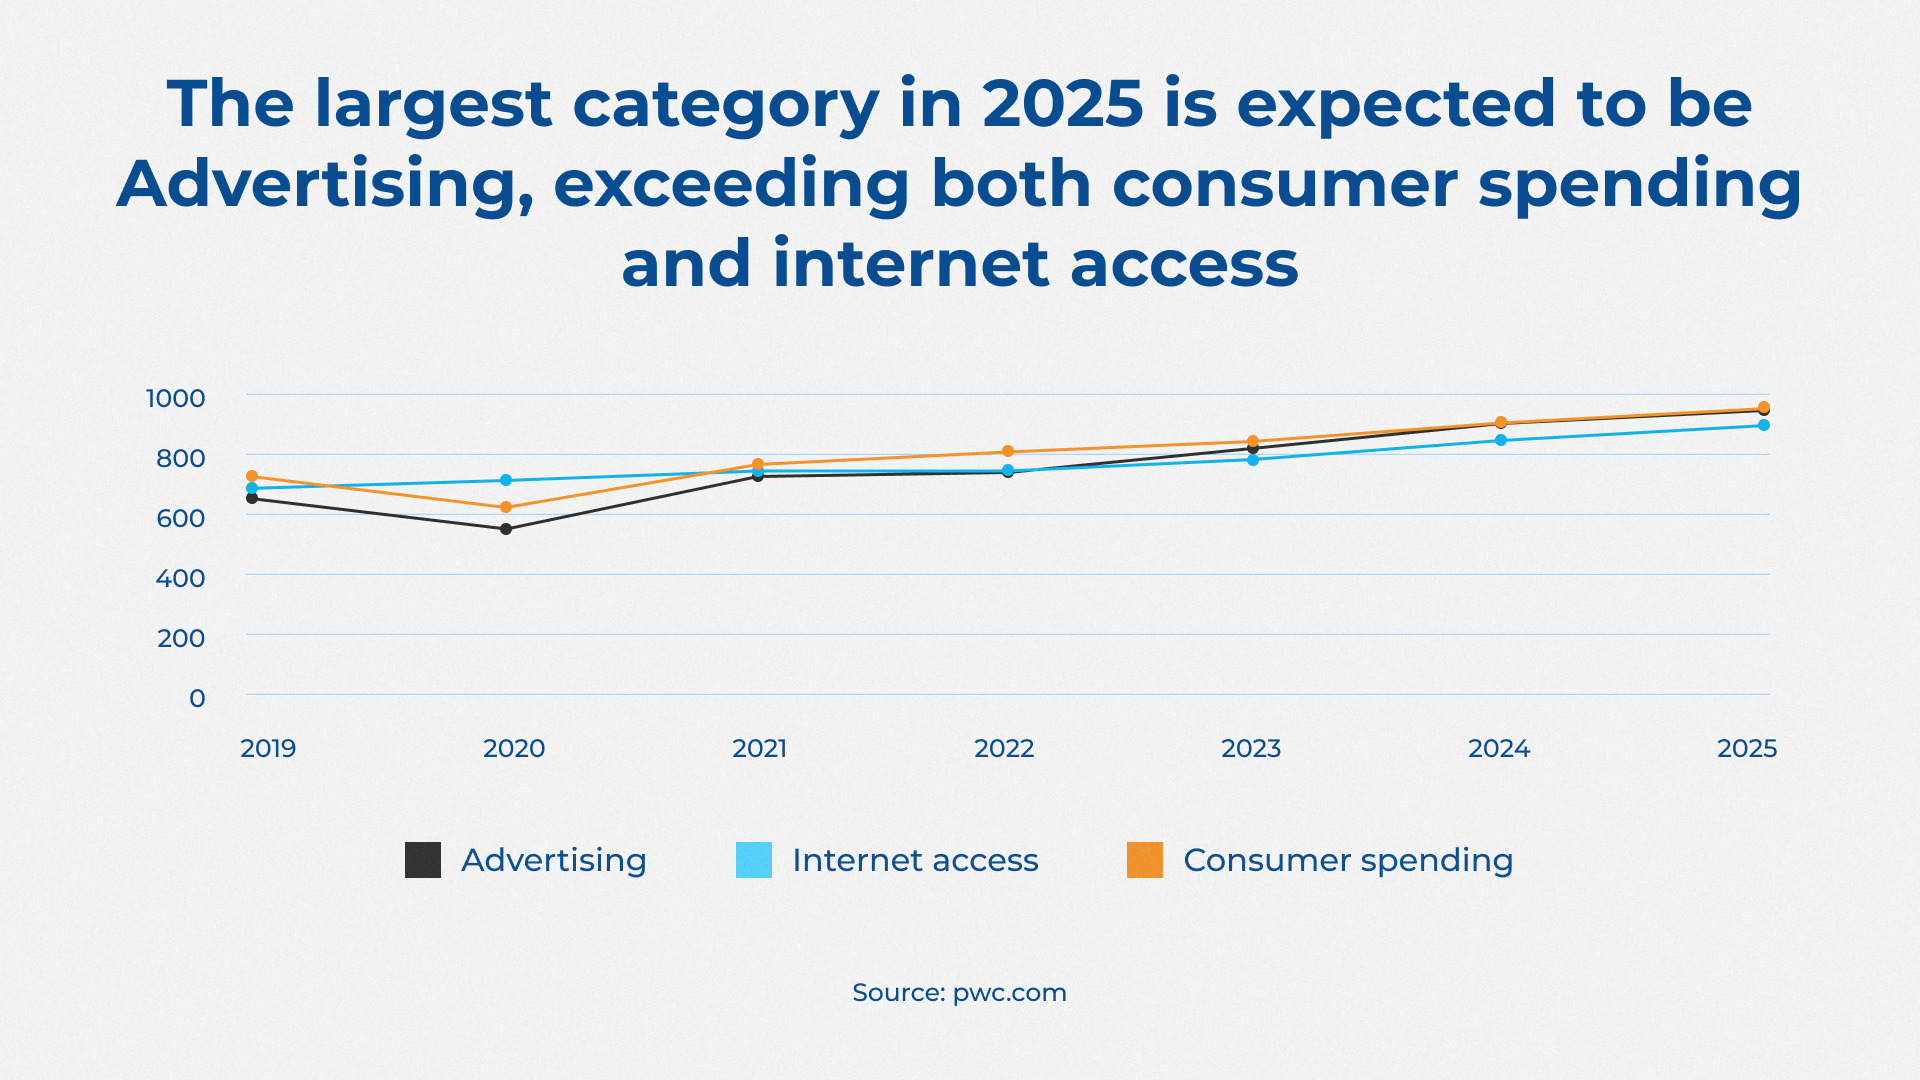 The largest category in 2025 is expected to be Advertising, exceeding both consumer spending and internet access